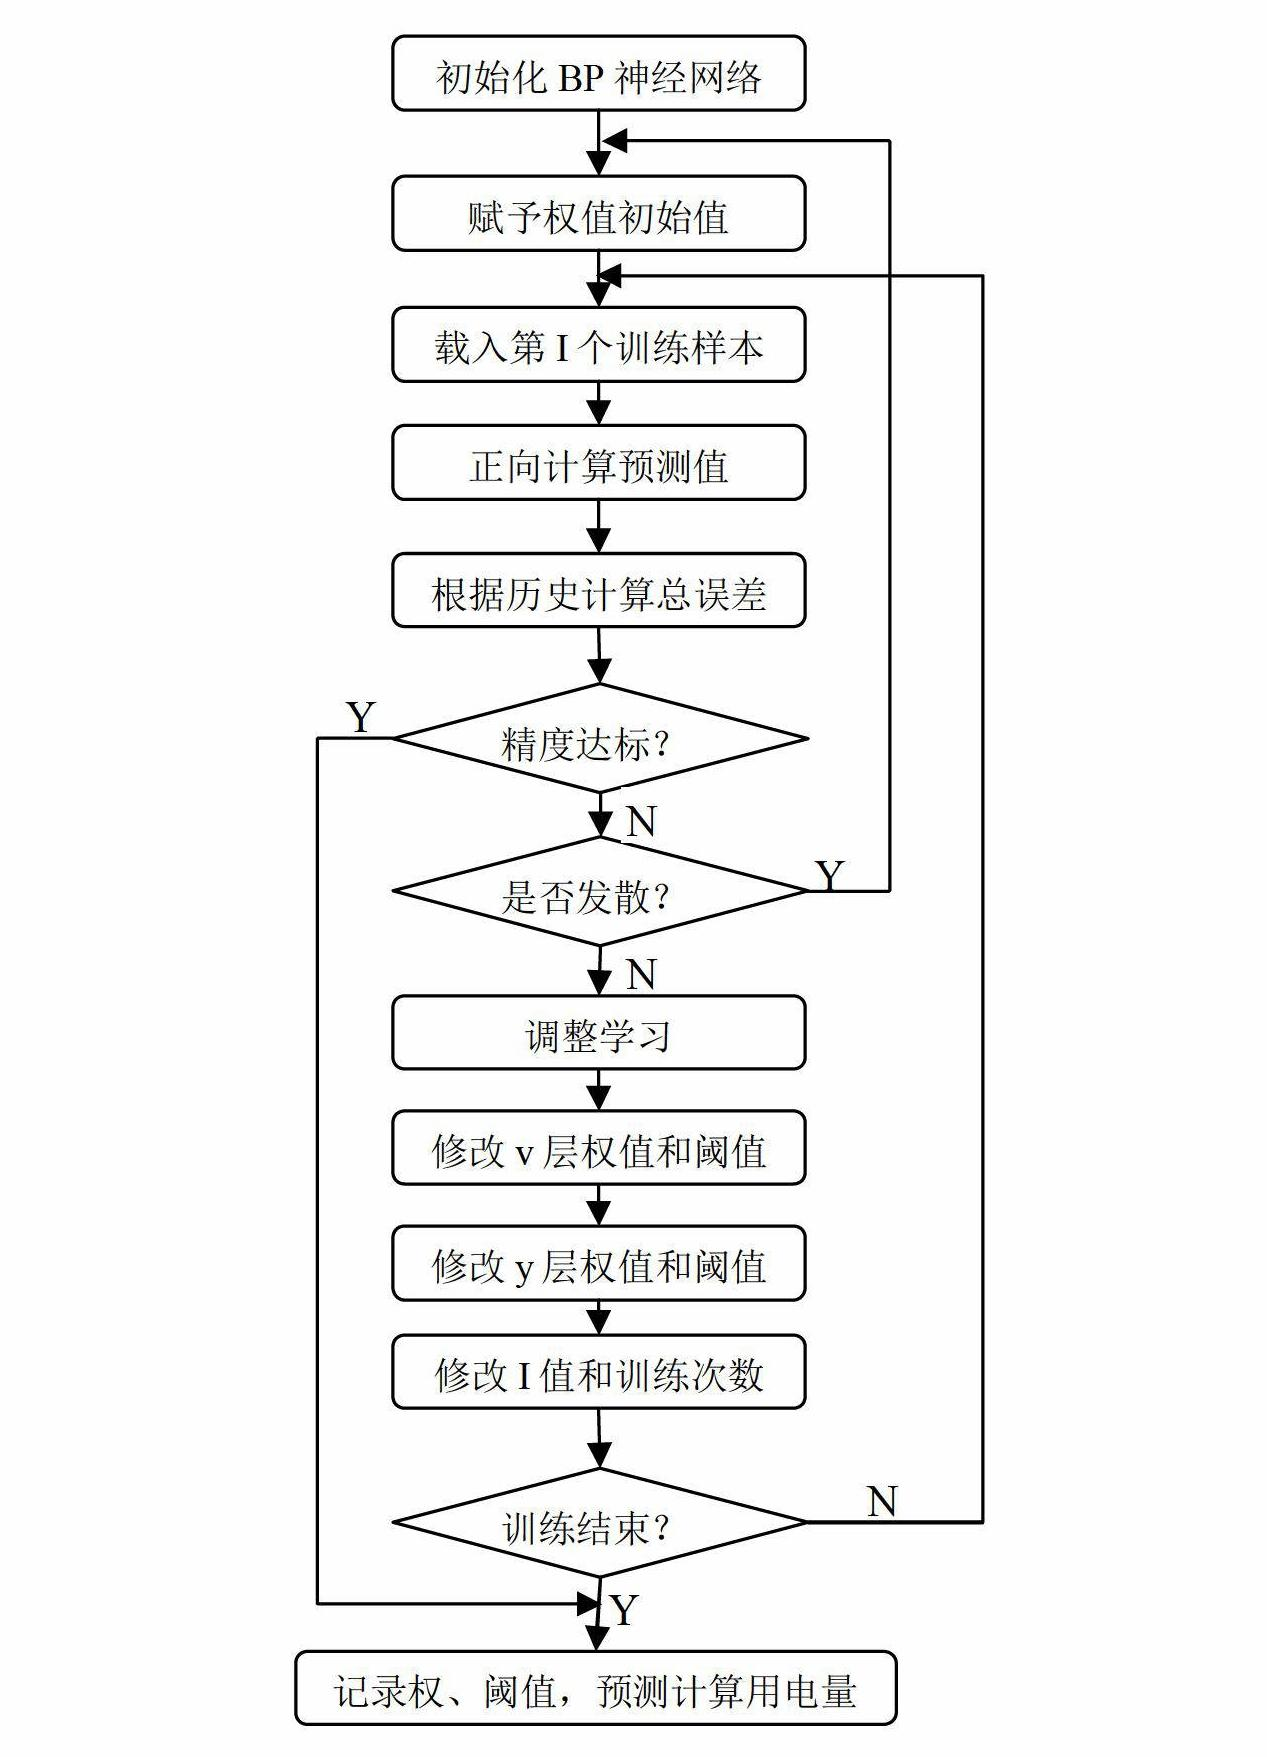 Electricity consumption intelligent prediction system and method